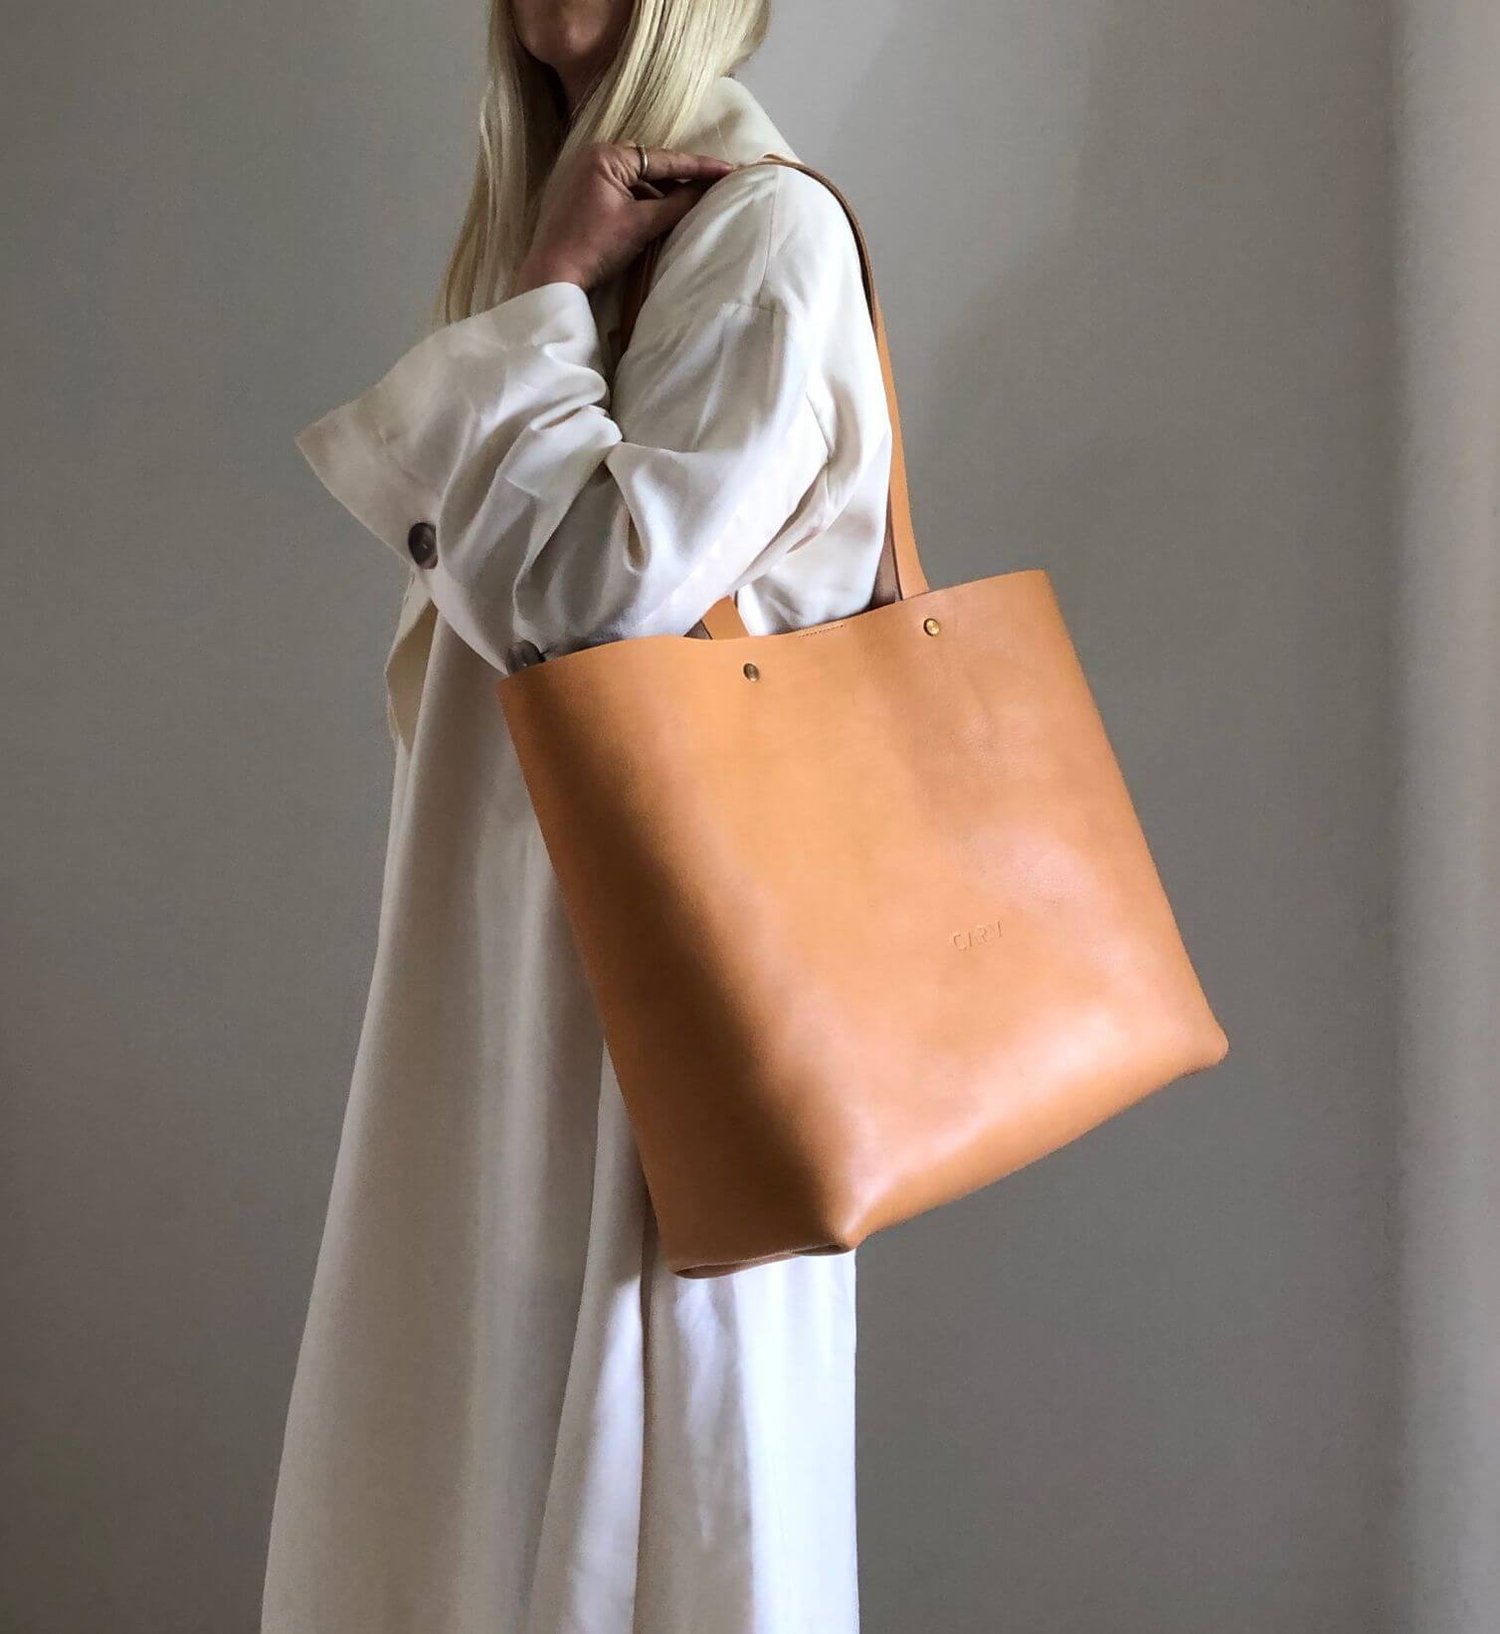 Ethical Leather Bags & Accessories. Sustainably Made in the UK —